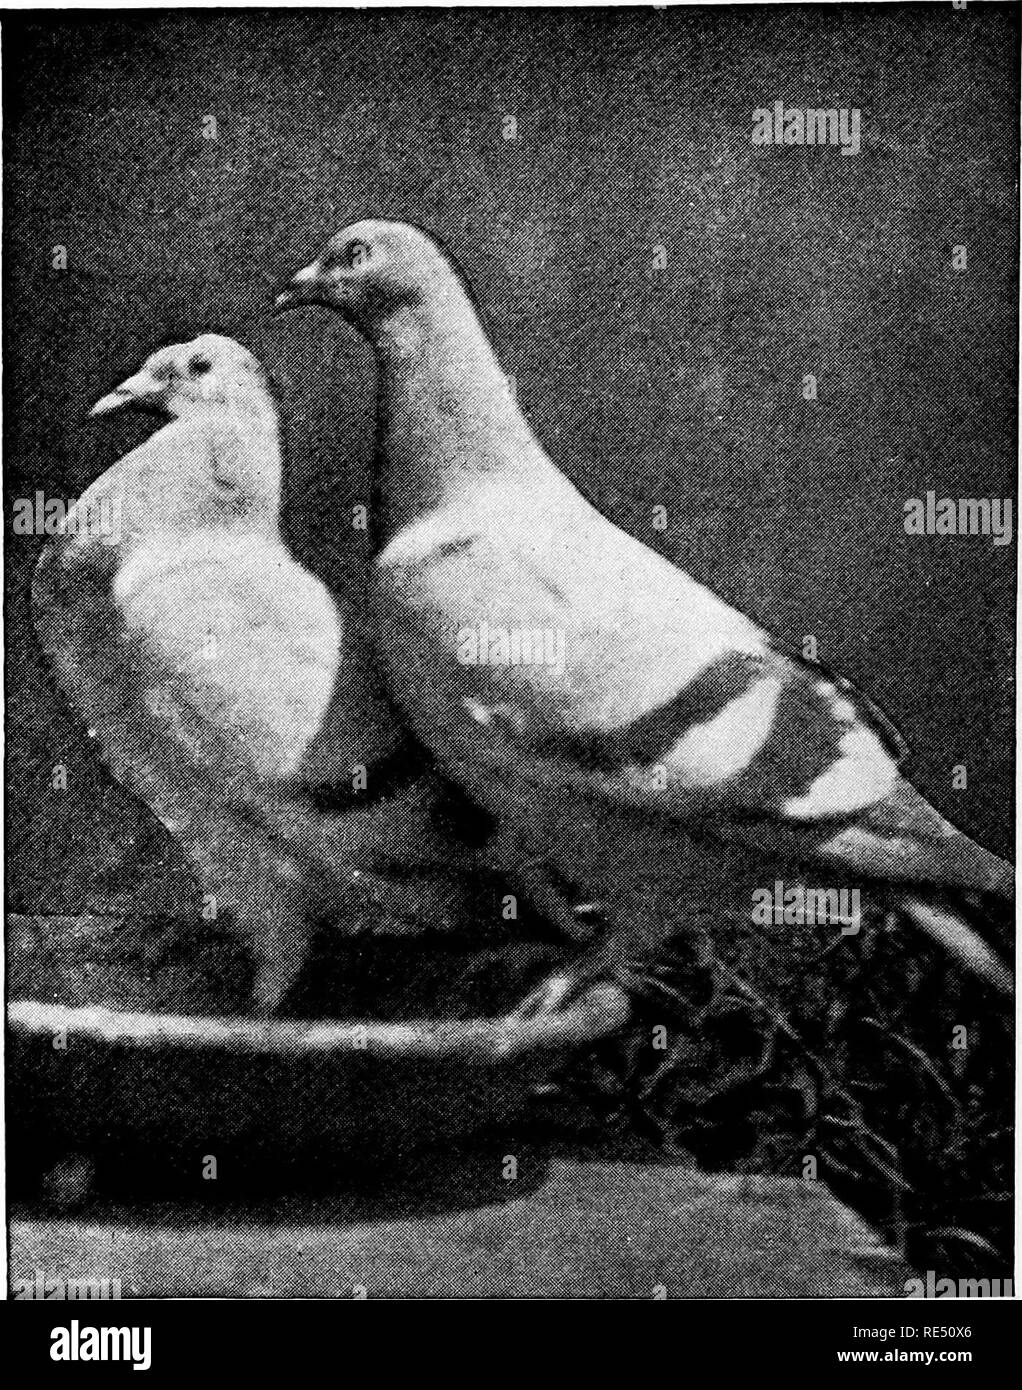 . The national standard squab book. Pigeons. KILLING AGE OF SQUABS A pair of Plymouth Rock Extra Homer squabs four weeks old in the neat, ready to be taken out and killed for market. They are in full feather at this age and frequently weigh as much or more than the parent birds but as soon as they get out of the nest and run around they train off thisf at and become lean. The cere on the bill of squabsis brown and tender and not hard and white as injthe case of the old birds. This is the quickest way to tell them^ from old pigeons, alive or killed. The squabs pictured here weighed one .Dound e Stock Photo